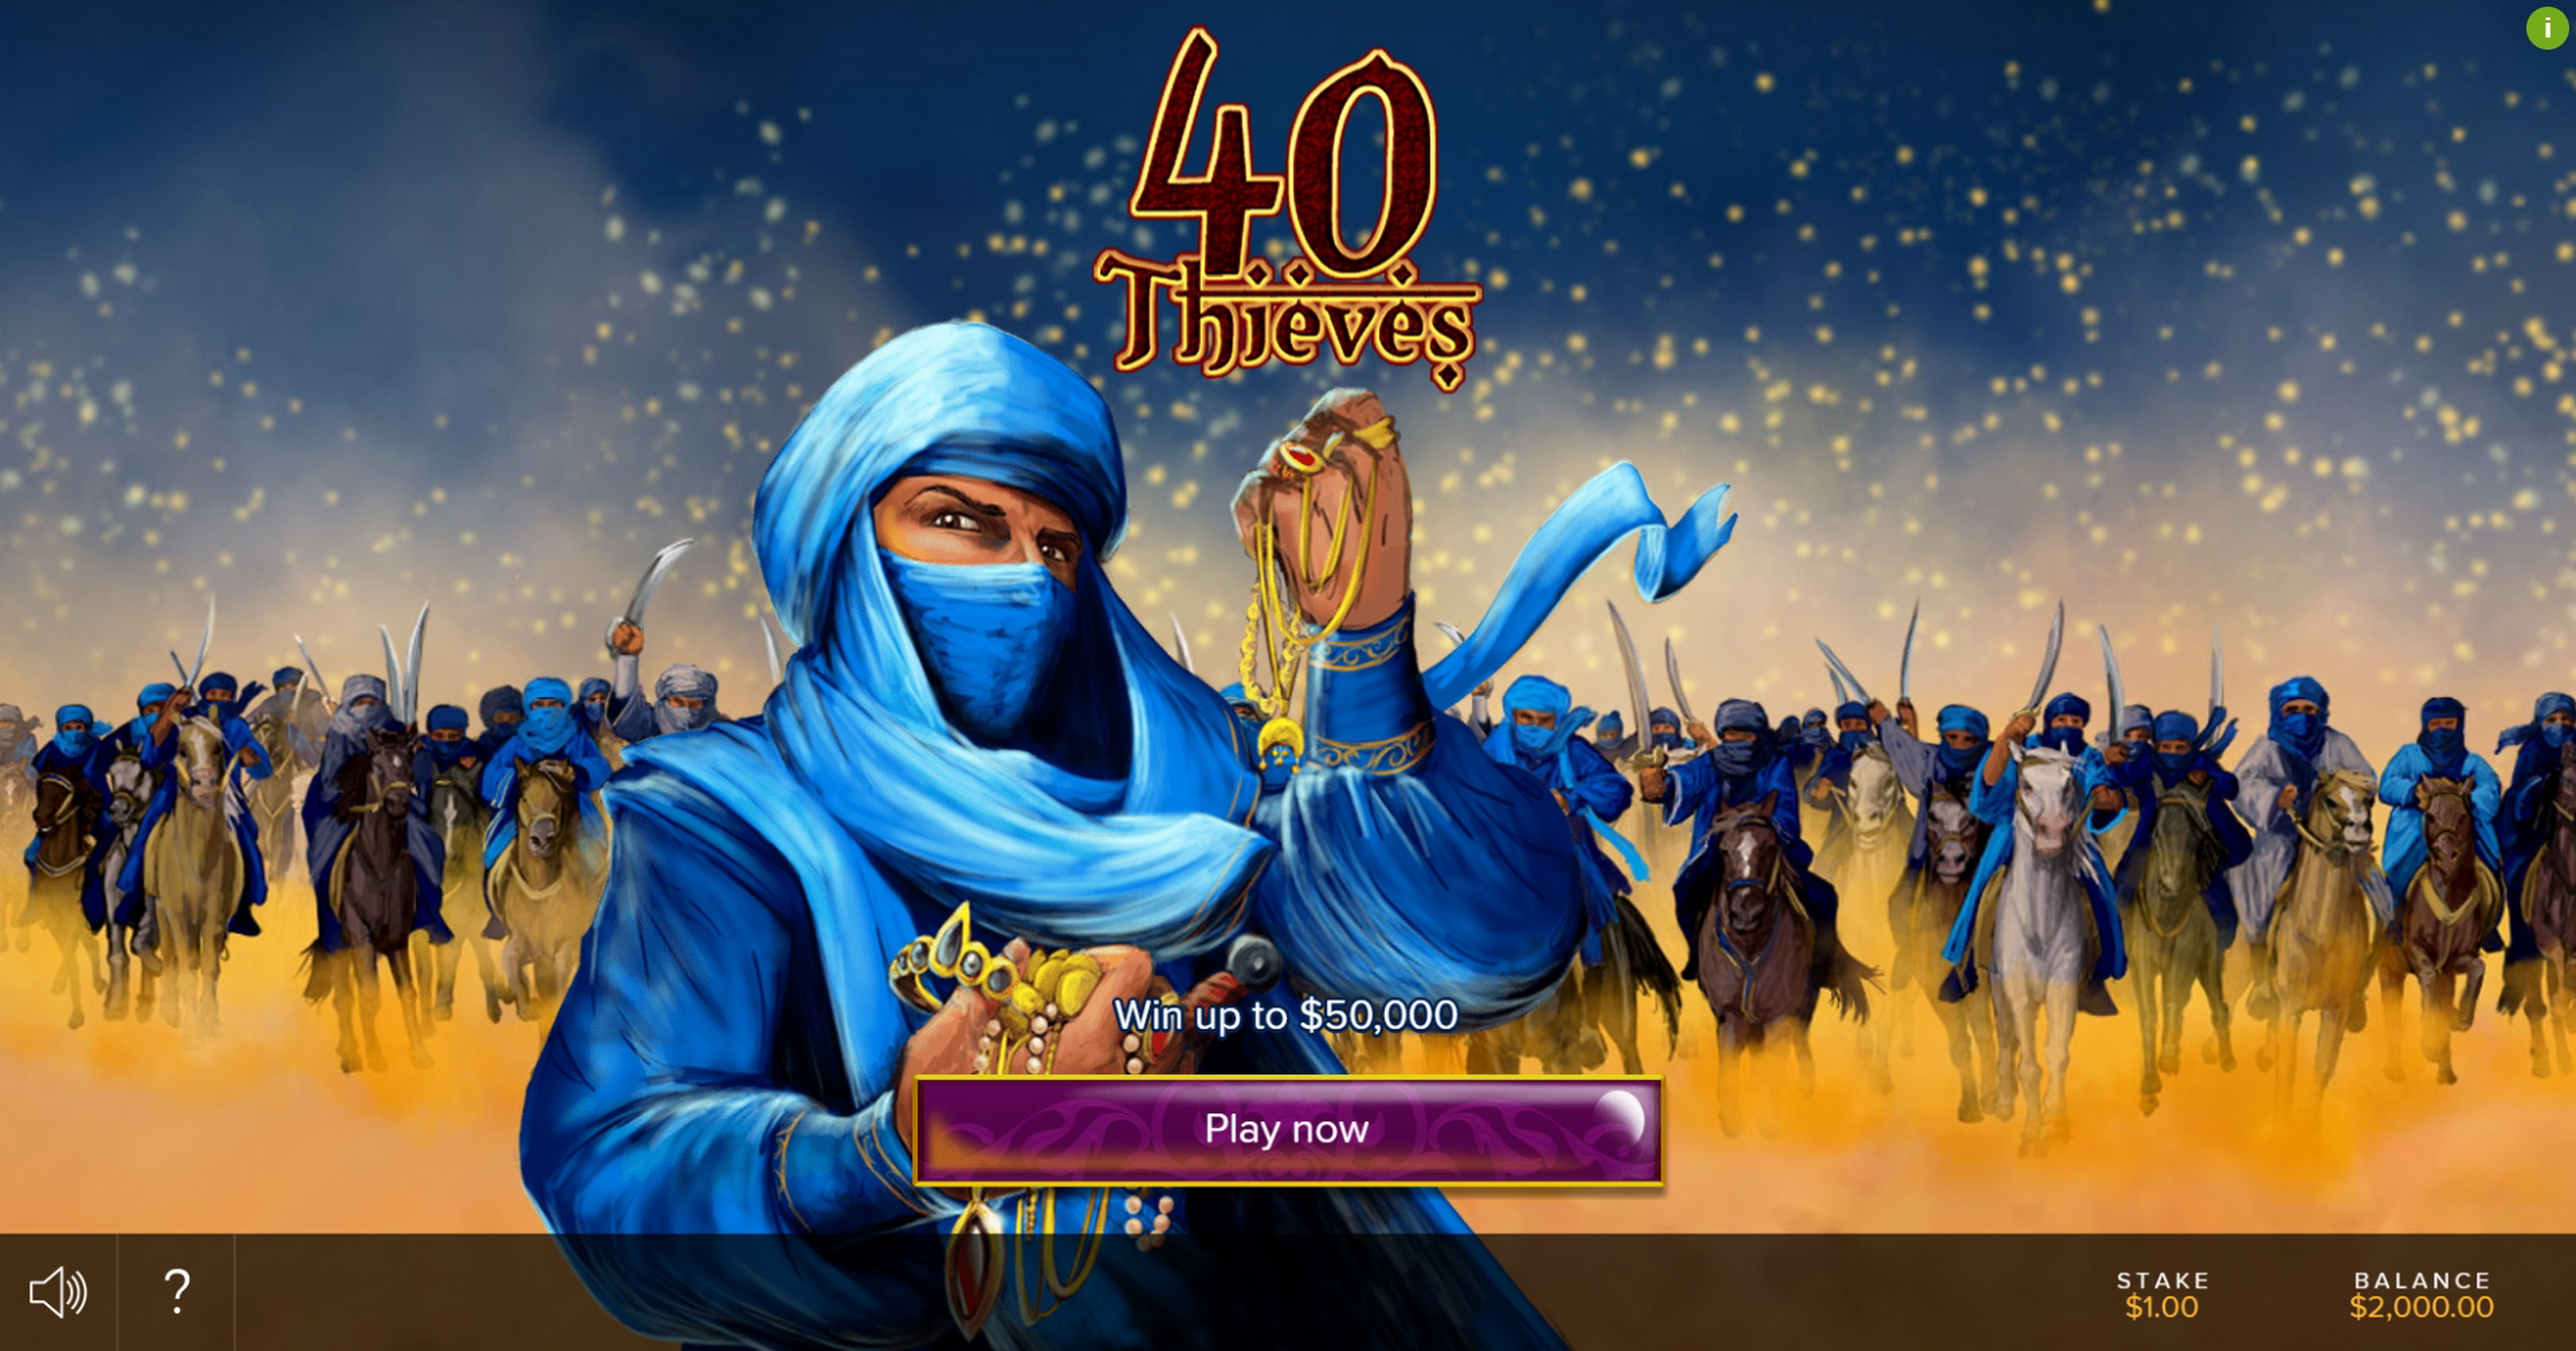 Play 40 Thieves Free Casino Slot Game by Bally Wulff